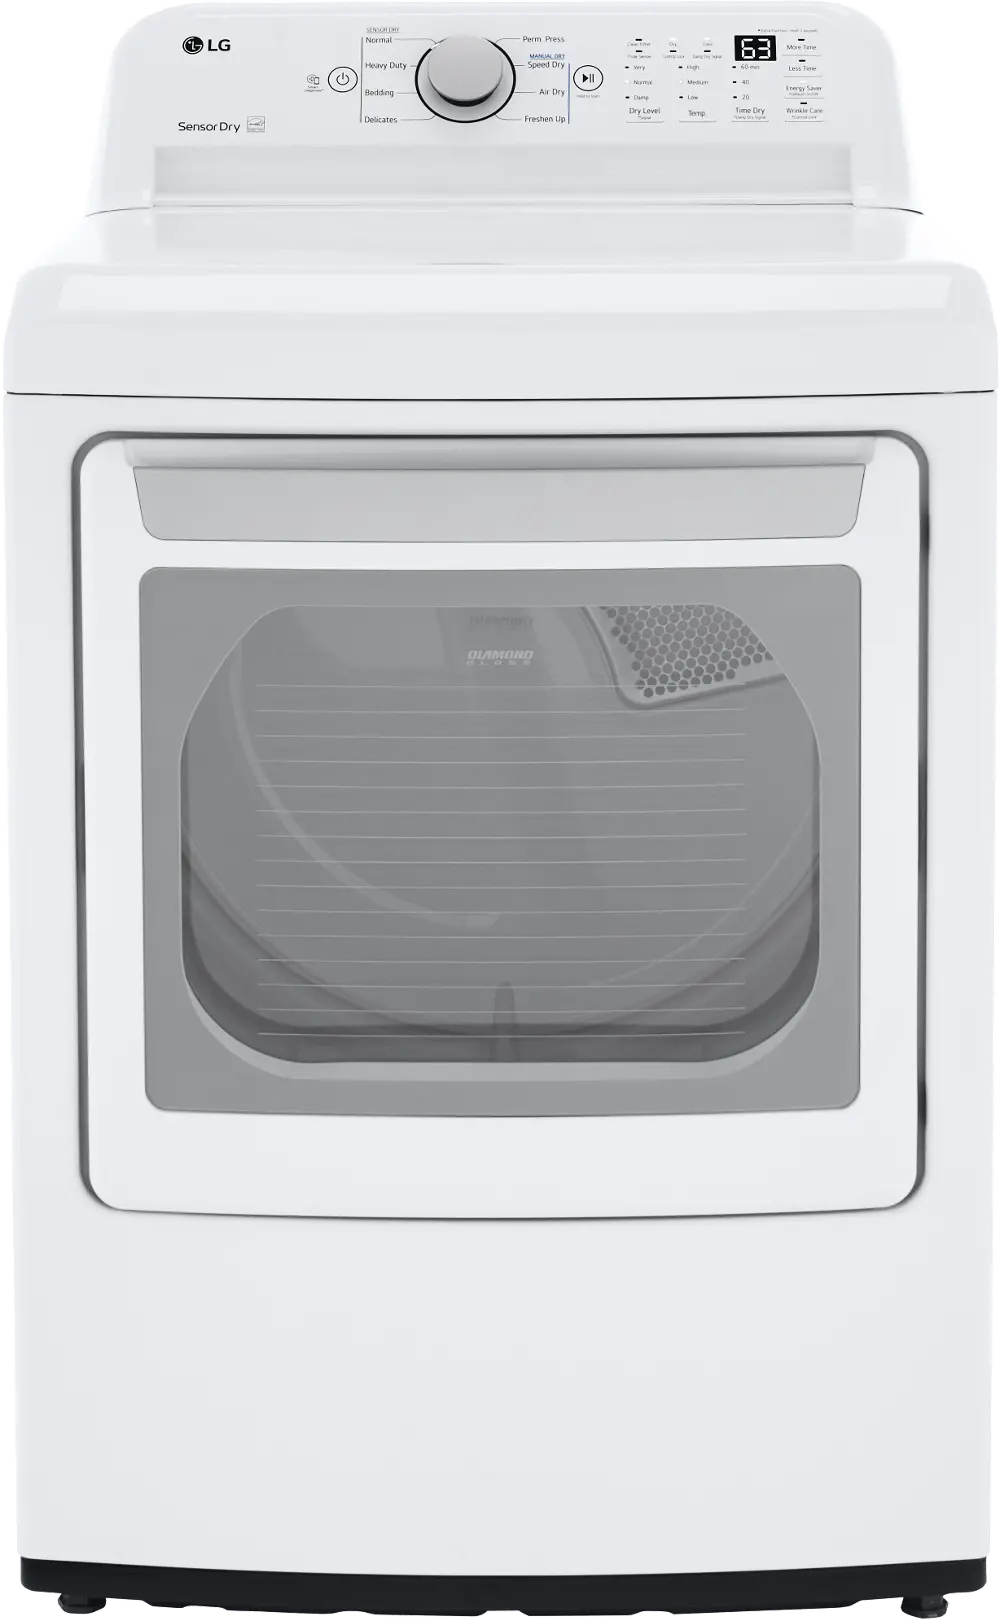 DLE7150W LG Rear Control Electric Dryer - White-1